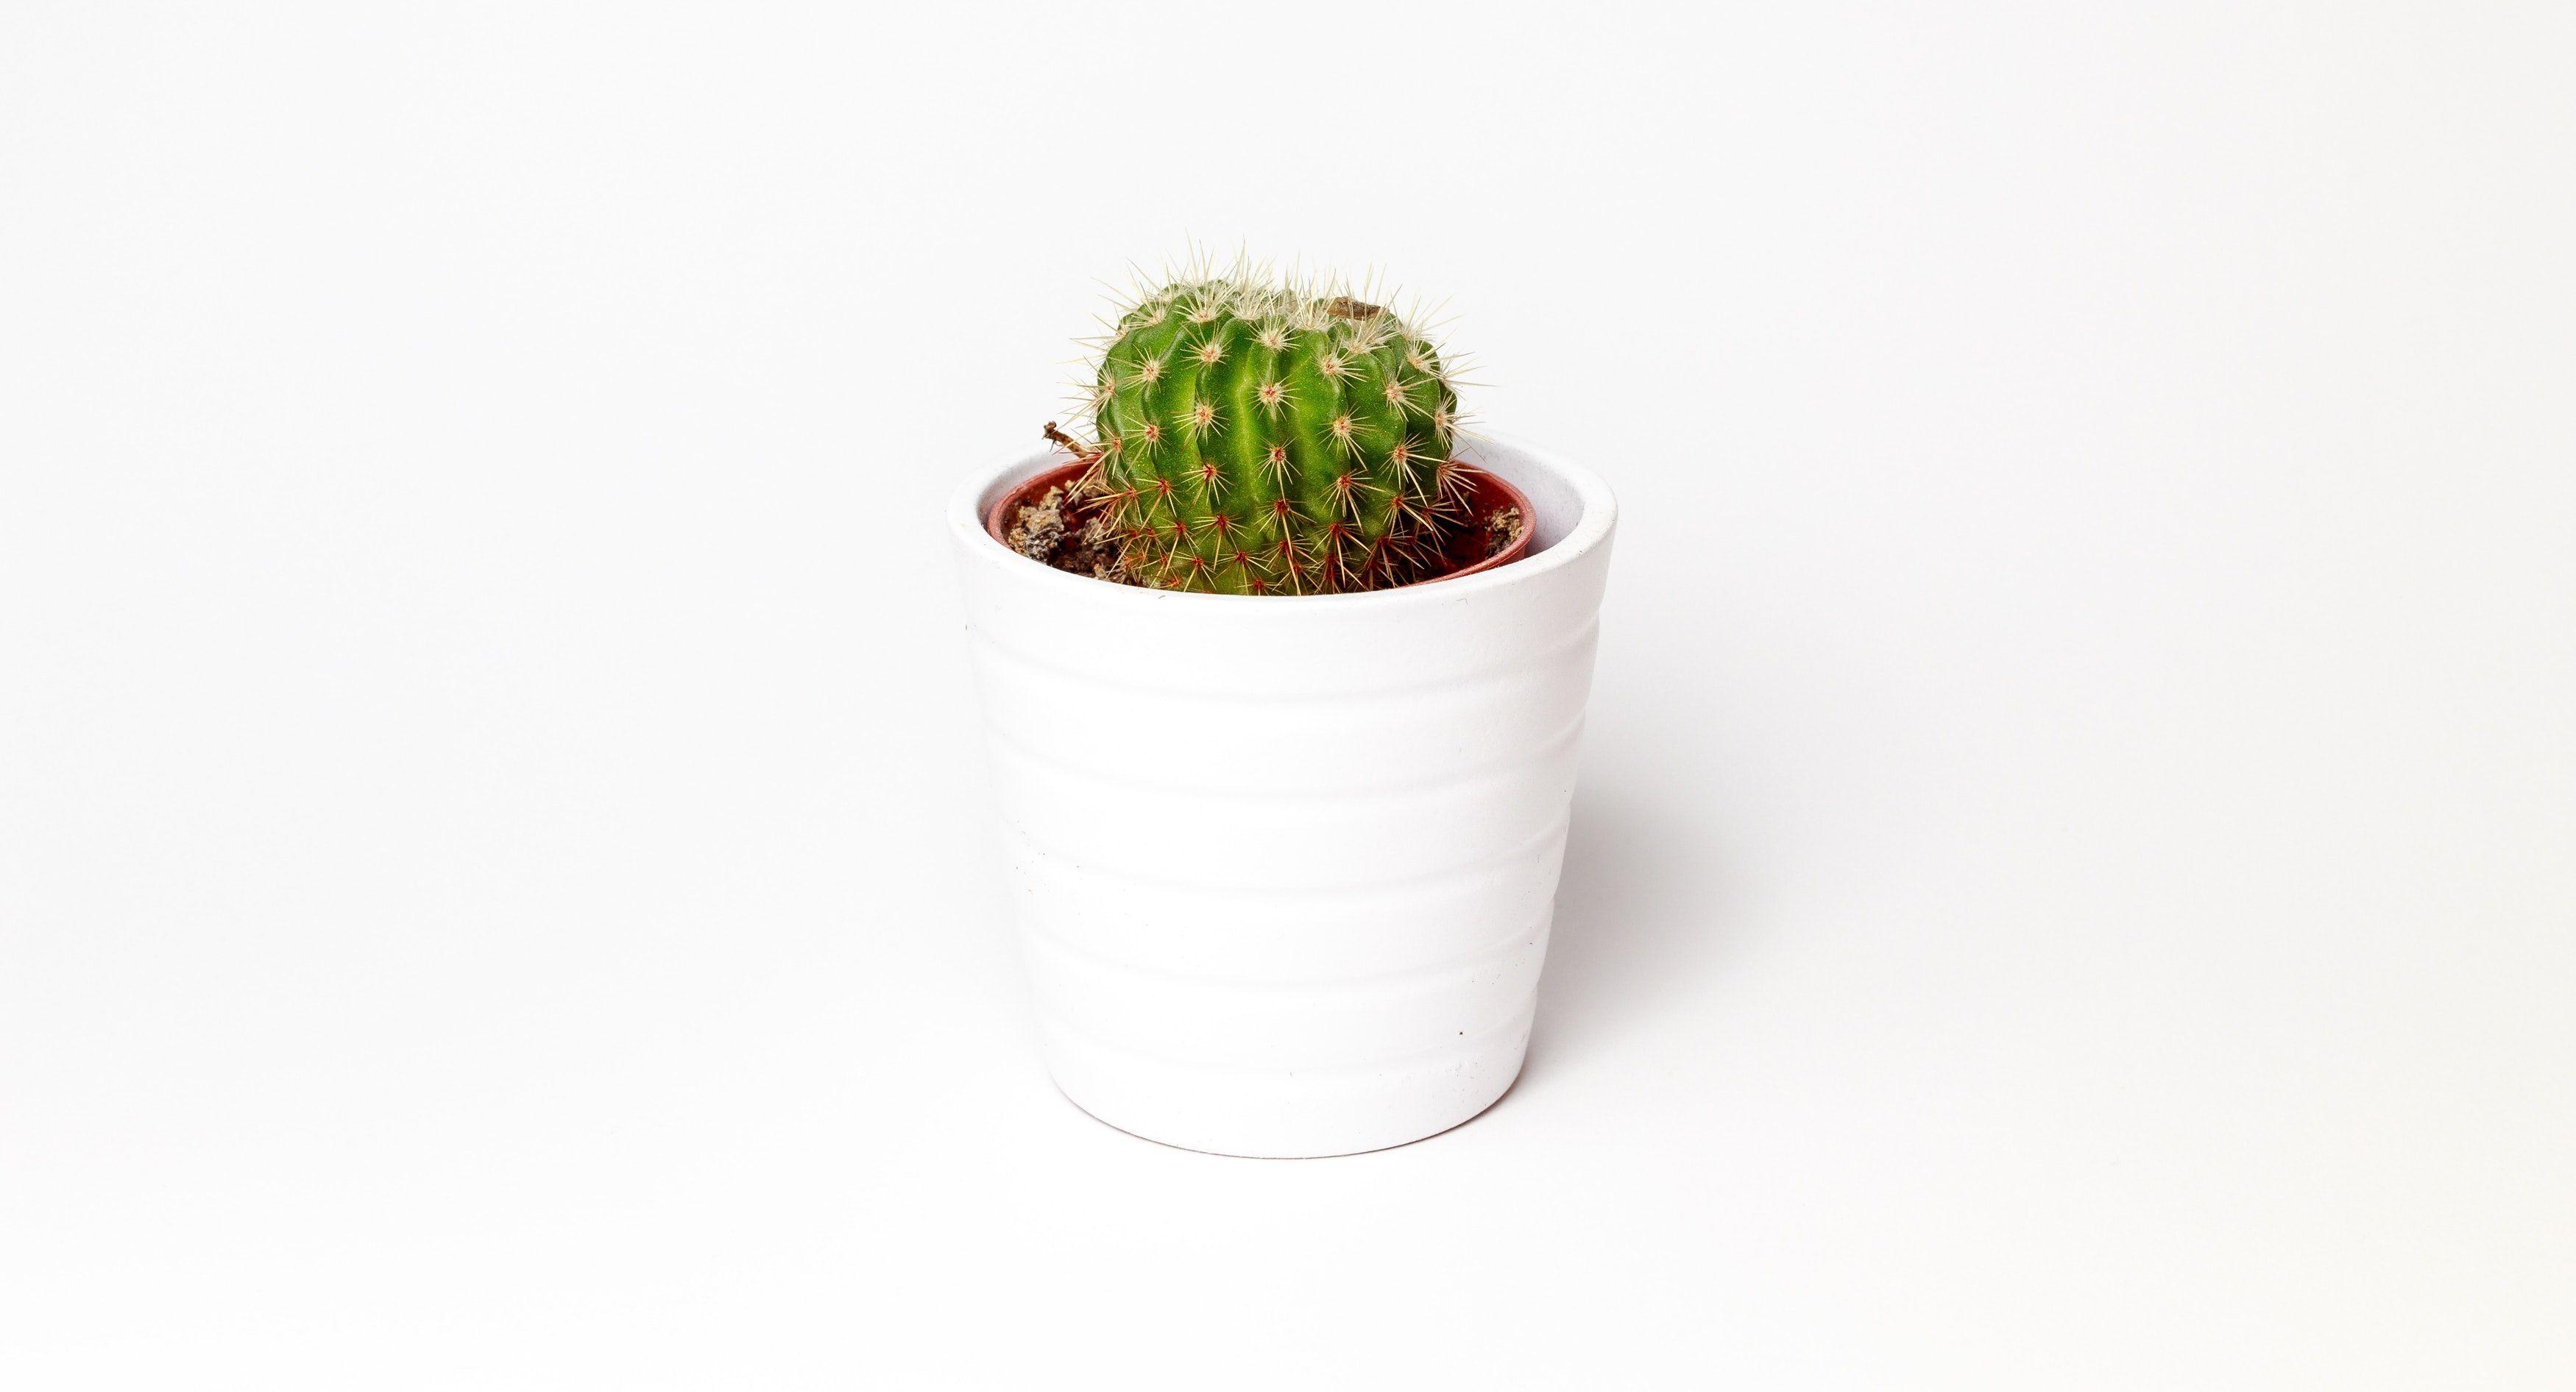 Green Cactus Potted Plant on White Ceramic Pot · Free